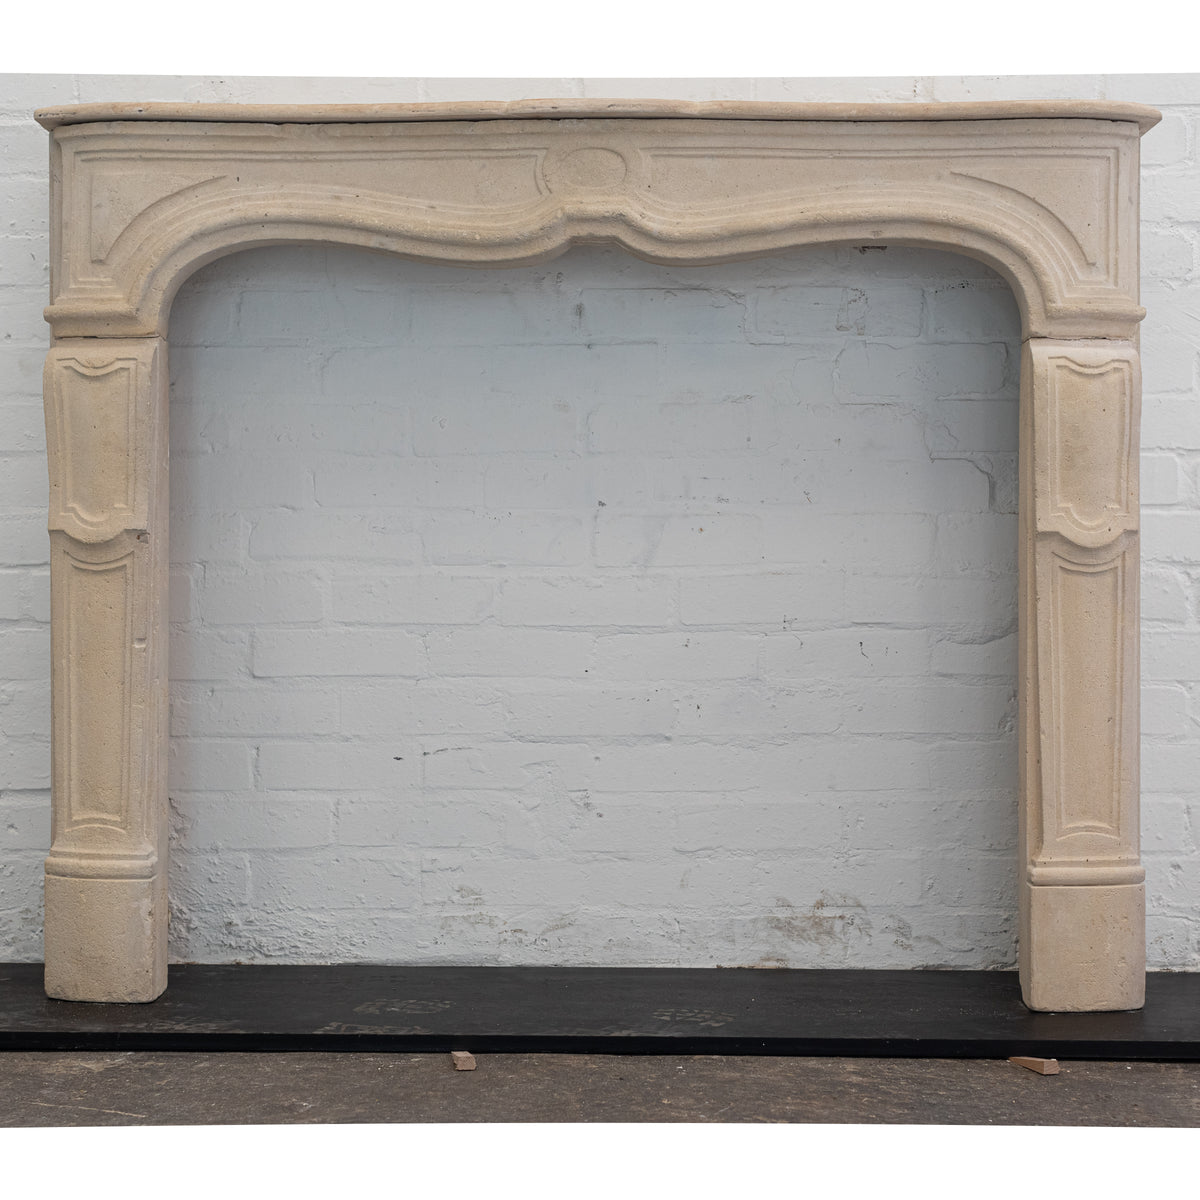 Antique 19th Century Louis Style Stone Fireplace Surround | The Architectural Forum